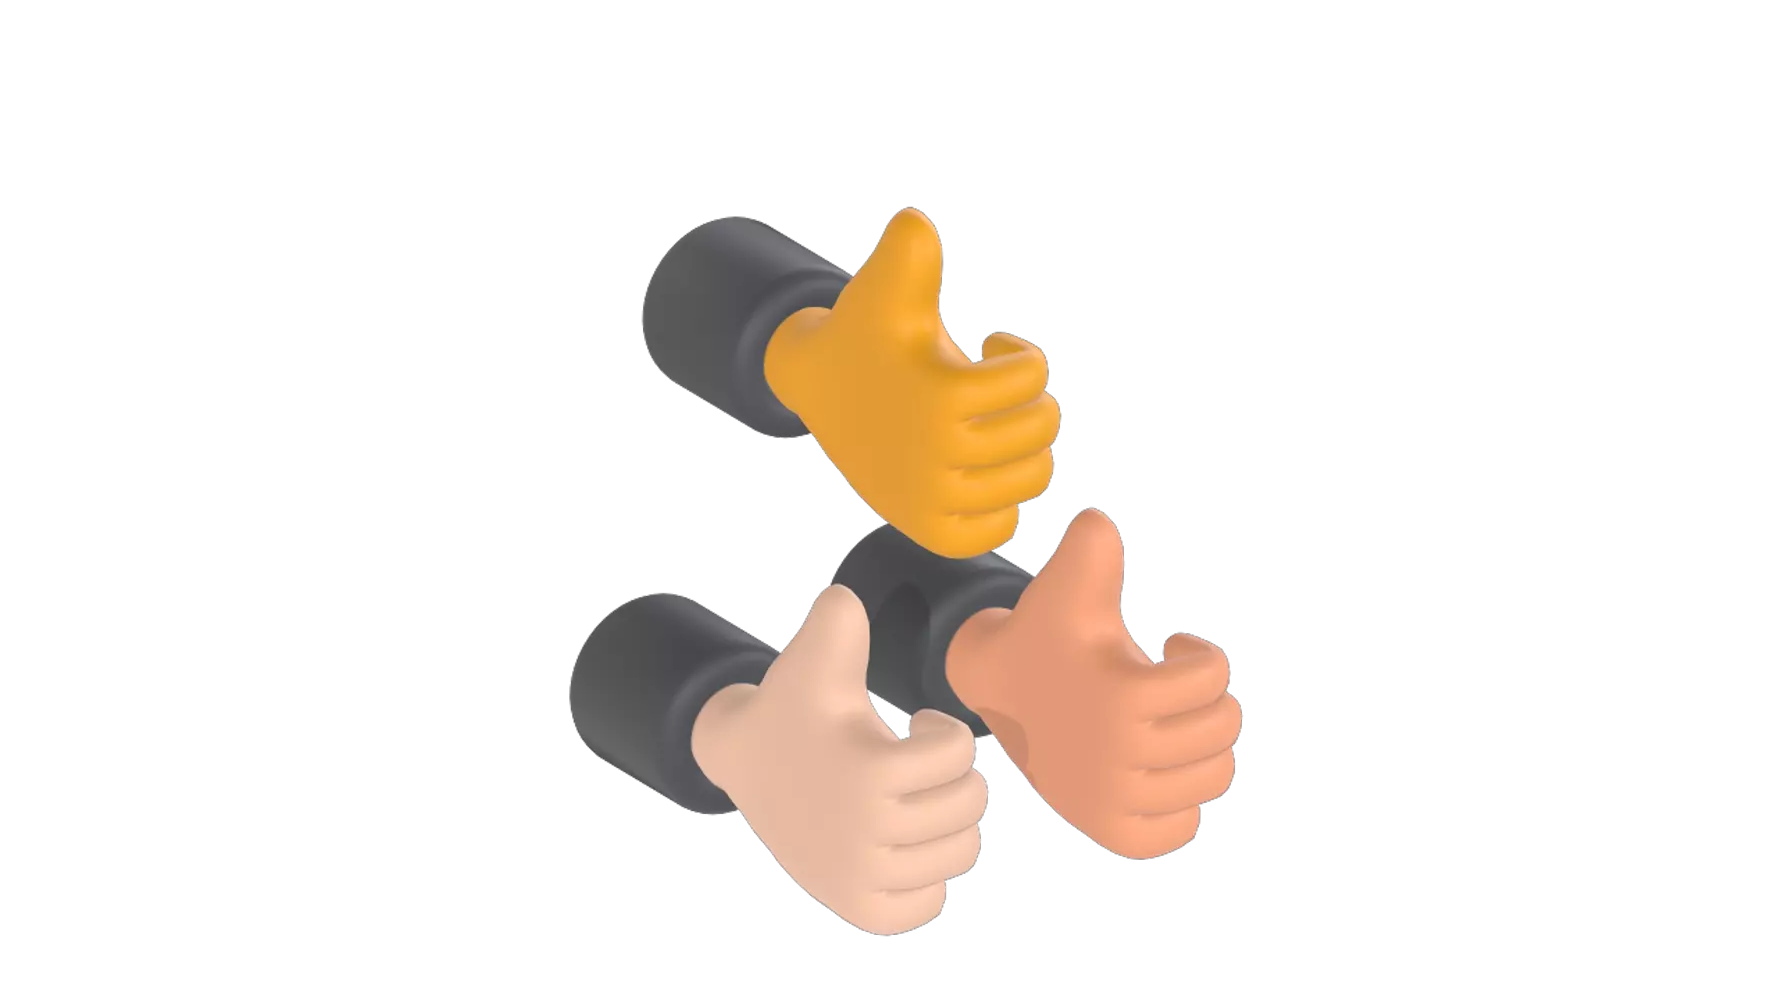 Thumb Up 3d model--aace3911-ce62-4122-8263-bf1f3beb94ee